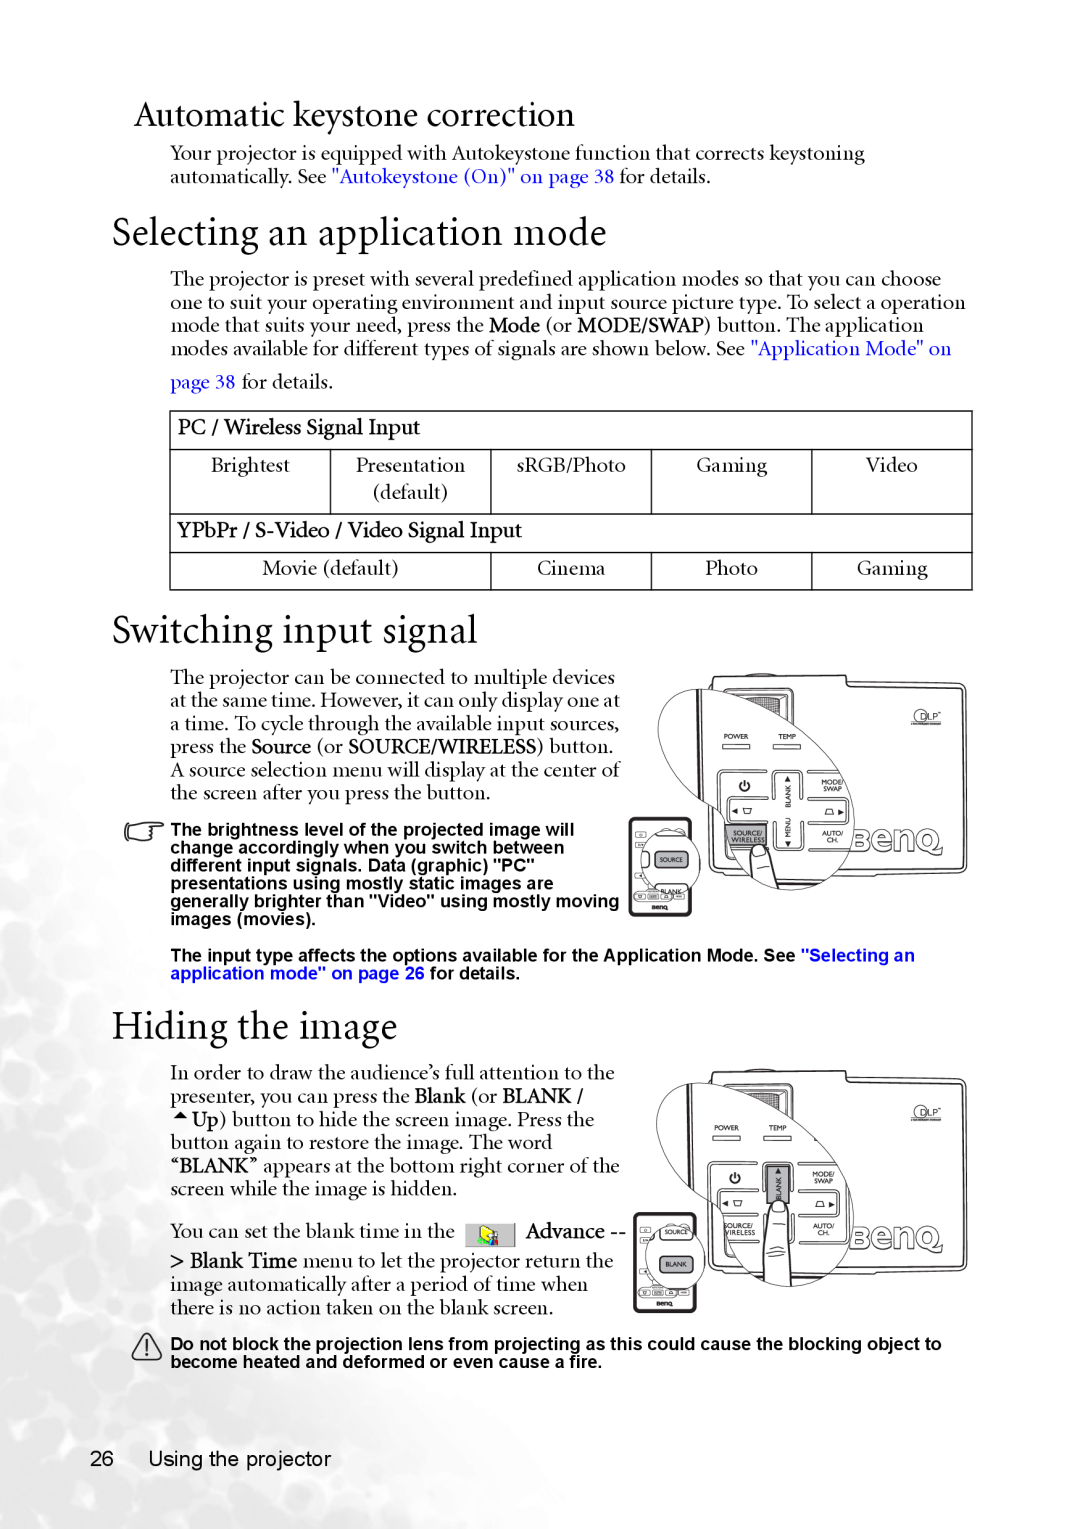 BenQ CP120 manual Selecting an application mode, Switching input signal, Hiding the image, Automatic keystone correction 